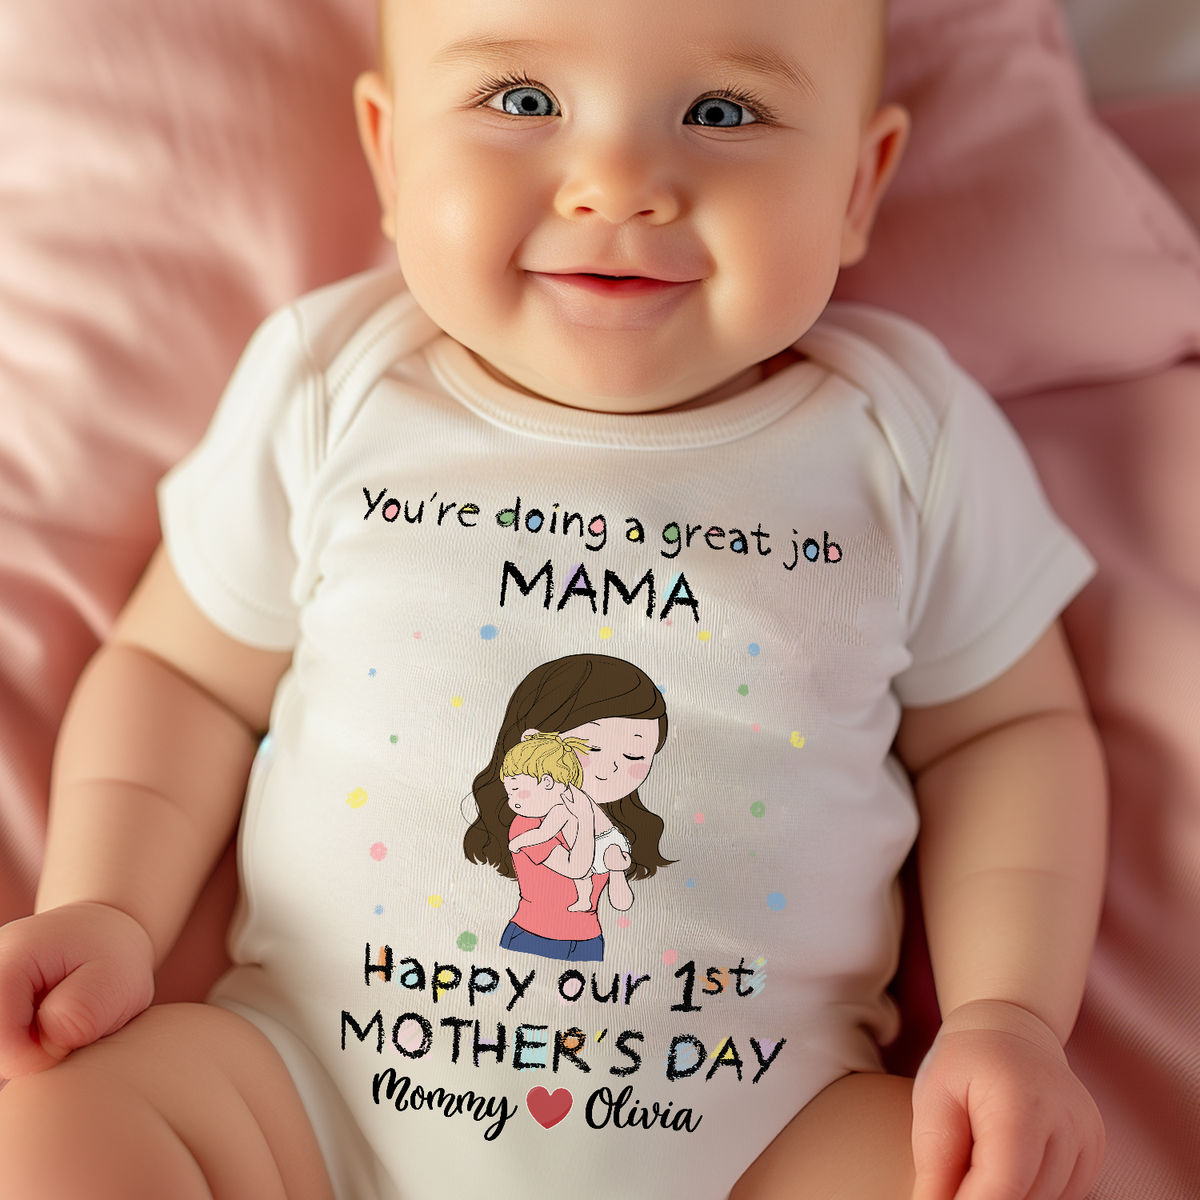 Mother's Day Gift - You're doing a Great Job Mama - Happy Our 1st Mother's Day - Personalized Shirt